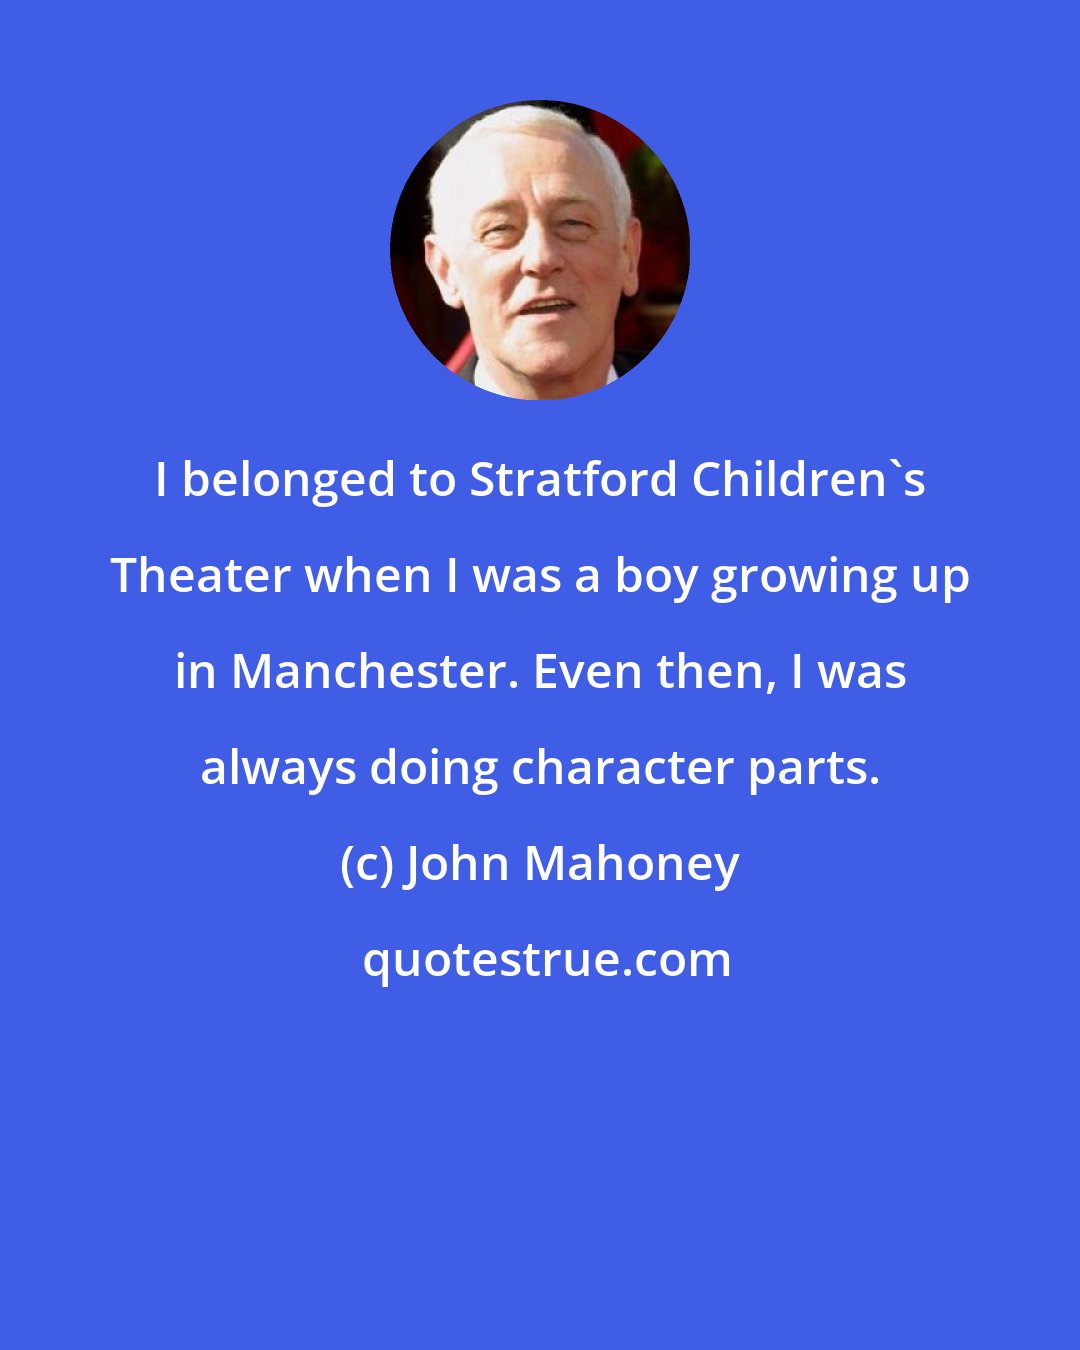 John Mahoney: I belonged to Stratford Children's Theater when I was a boy growing up in Manchester. Even then, I was always doing character parts.